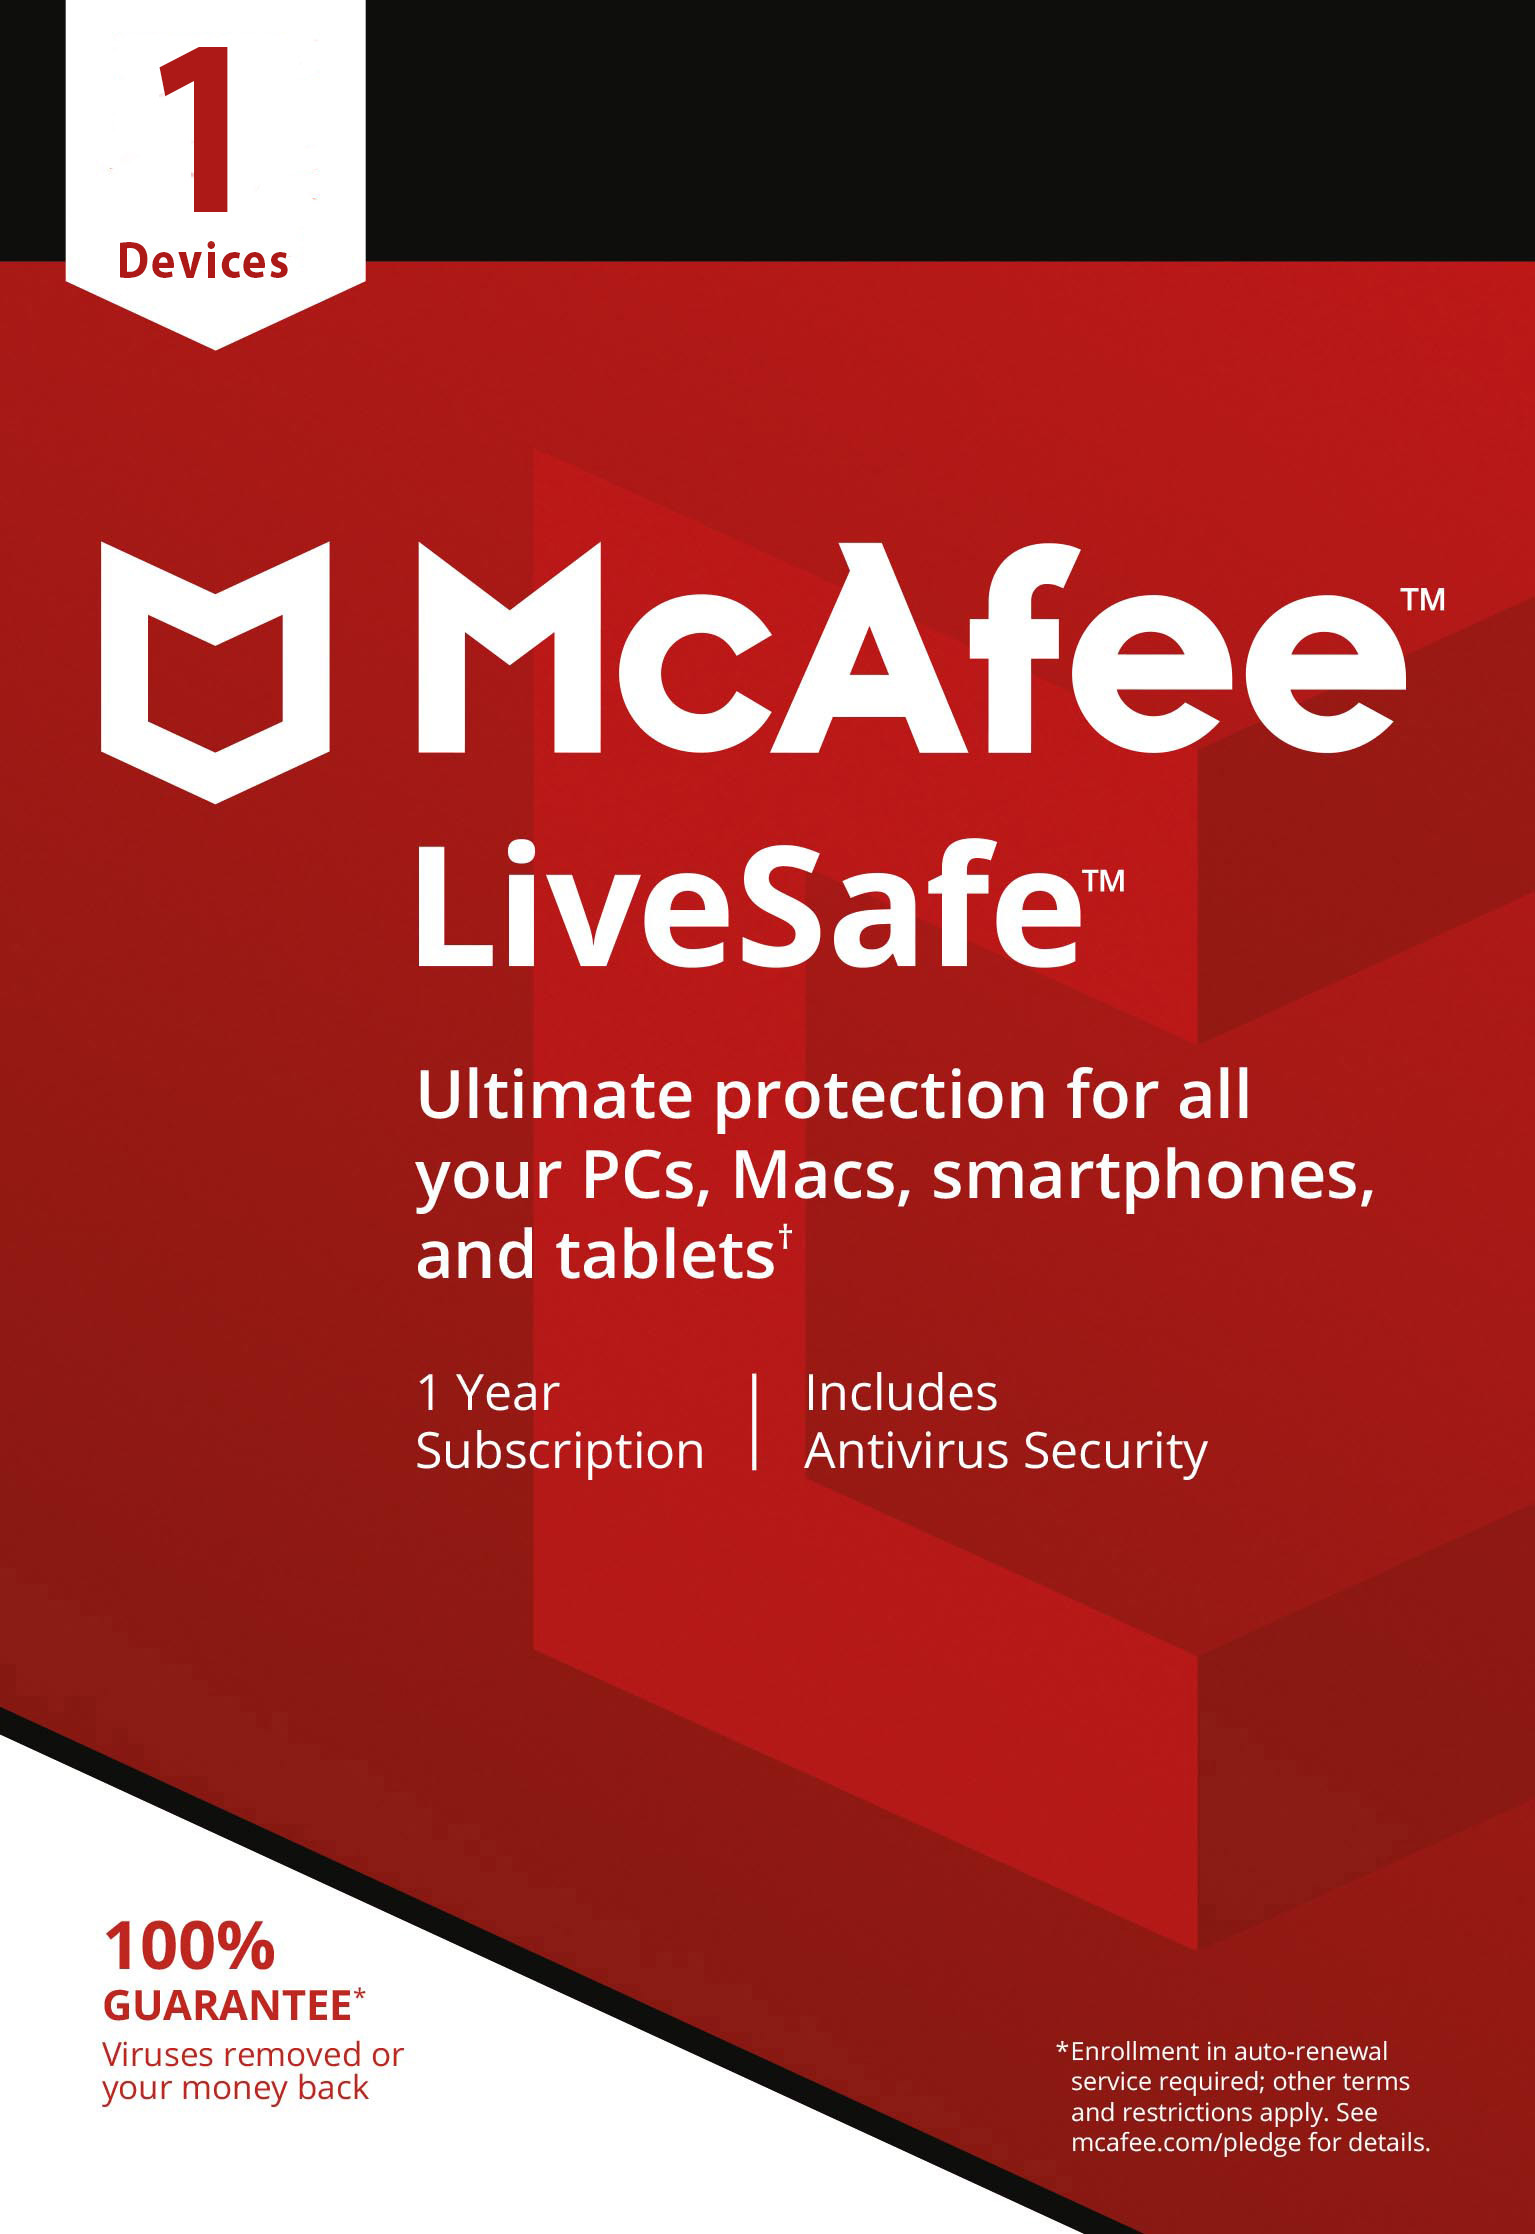 mcafee live safe 1 devices 1 year FINAL REVISE